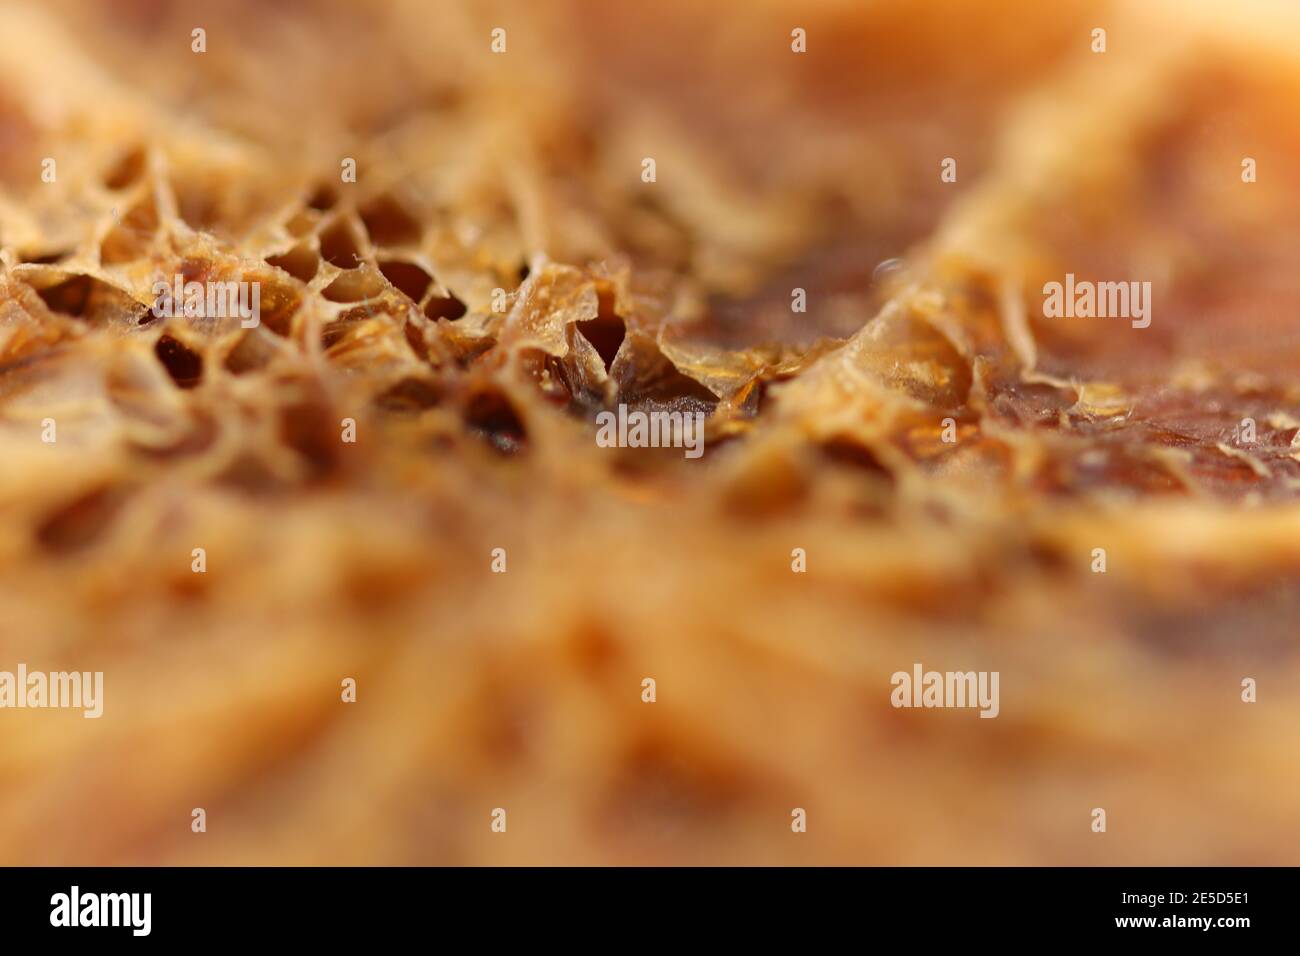 Close up of a pumpkin skin as it rots Stock Photo